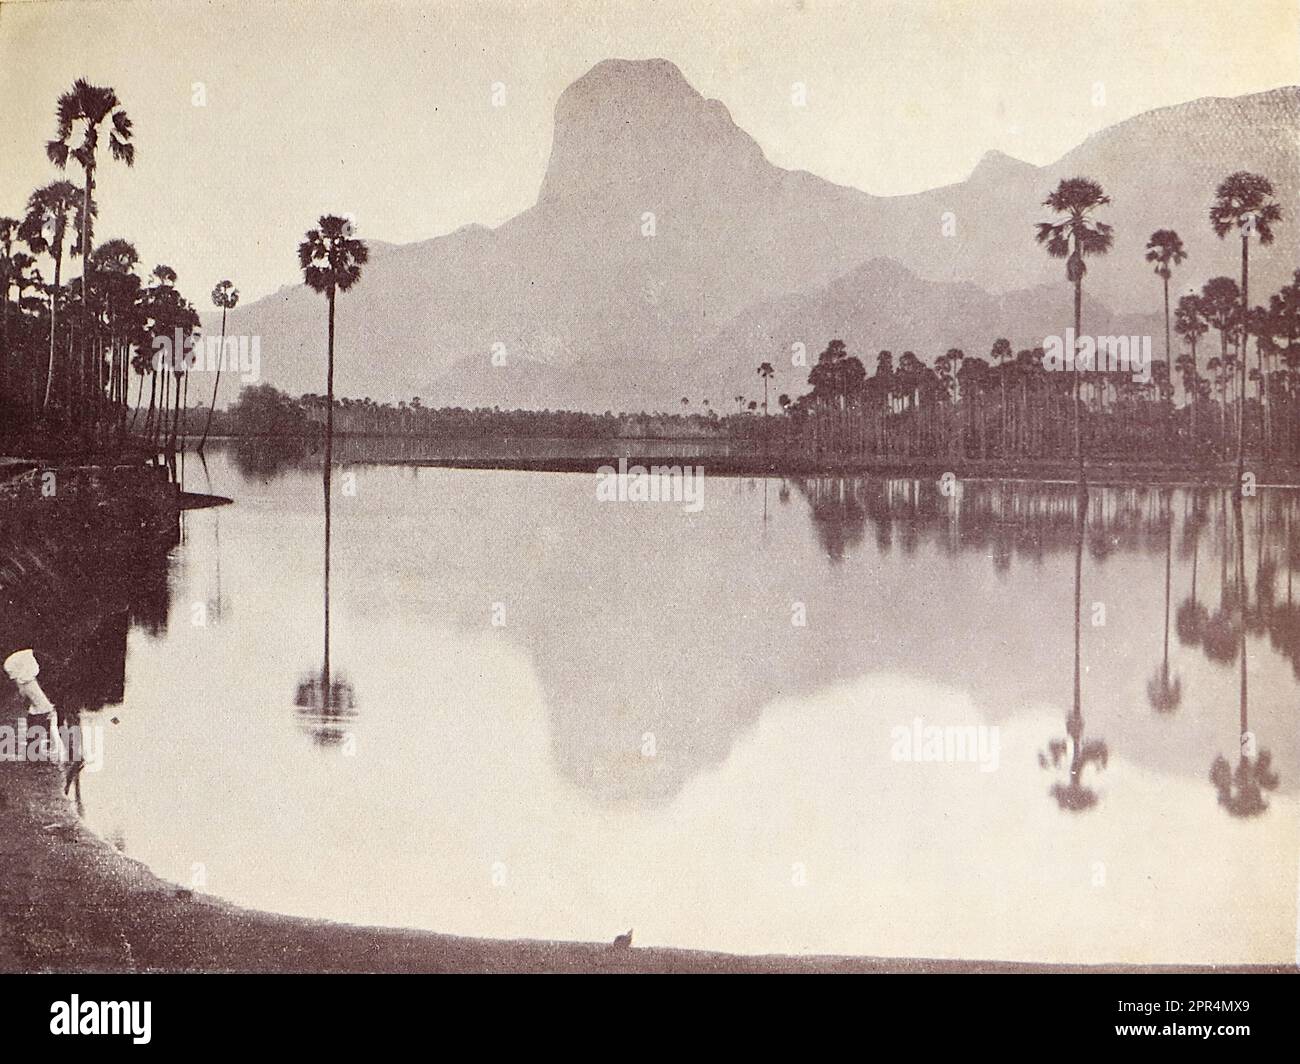 The Red Lake and hill, as seen from the Taraha nursery. Half-tone engraving from a photograph by Mr. Penn of Ootacamund (now known as Ooto), in the Tamil Nadu region of Southern India, c1912. The image relates to the Church of England Zenana Mission’s nursery and compound in Dohnavur, also in Tamil Nadu and about thirty miles from the southern tip of India. The compound was run by Amy Wilson-Carmichael and sought to promote Christianity among babies and children (at the time only girls, many who were victims of temple prostitution). Stock Photo